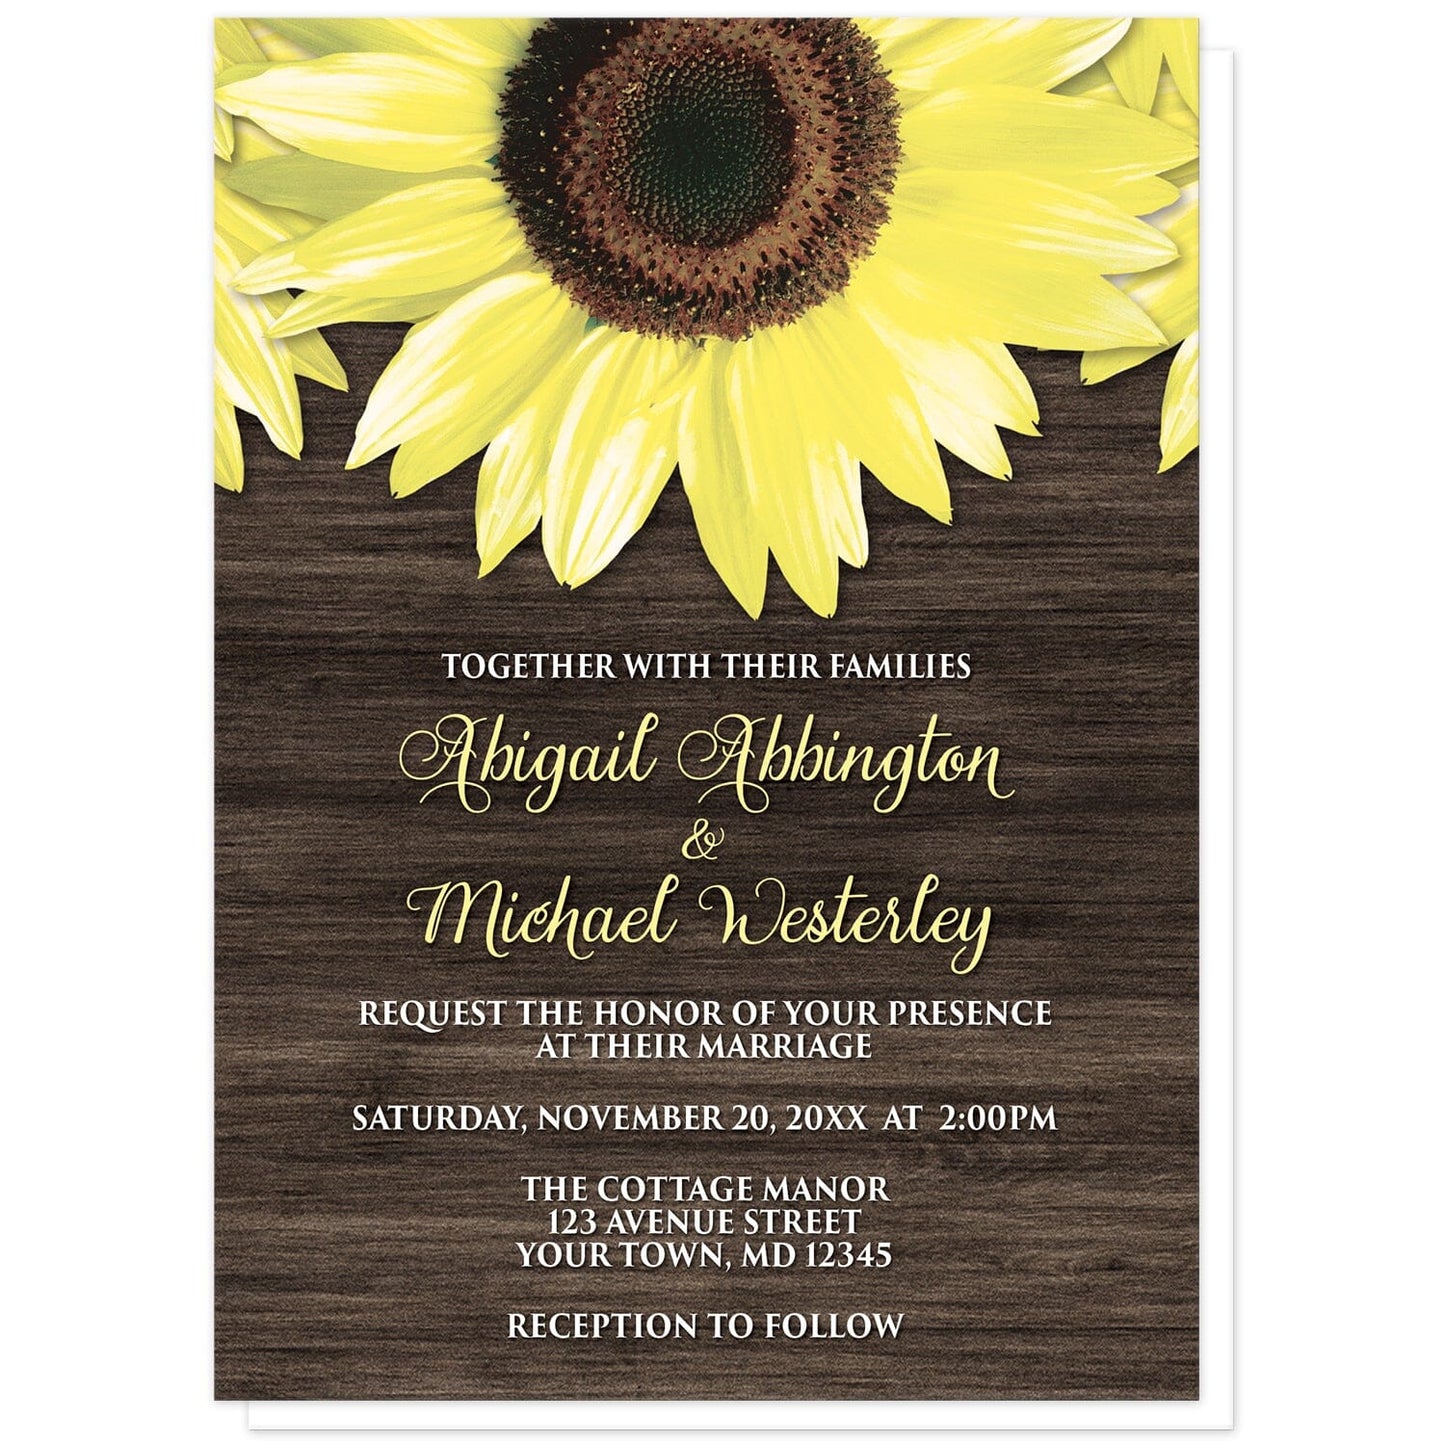 Rustic Sunflower and Wood Wedding Invitations at Artistically Invited. Southern-inspired rustic sunflower and wood wedding invitations designed with large yellow sunflowers along the top over a country brown wood design. Your personalized marriage celebration details are custom printed in yellow and white over the brown wood background below the pretty sunflowers. 